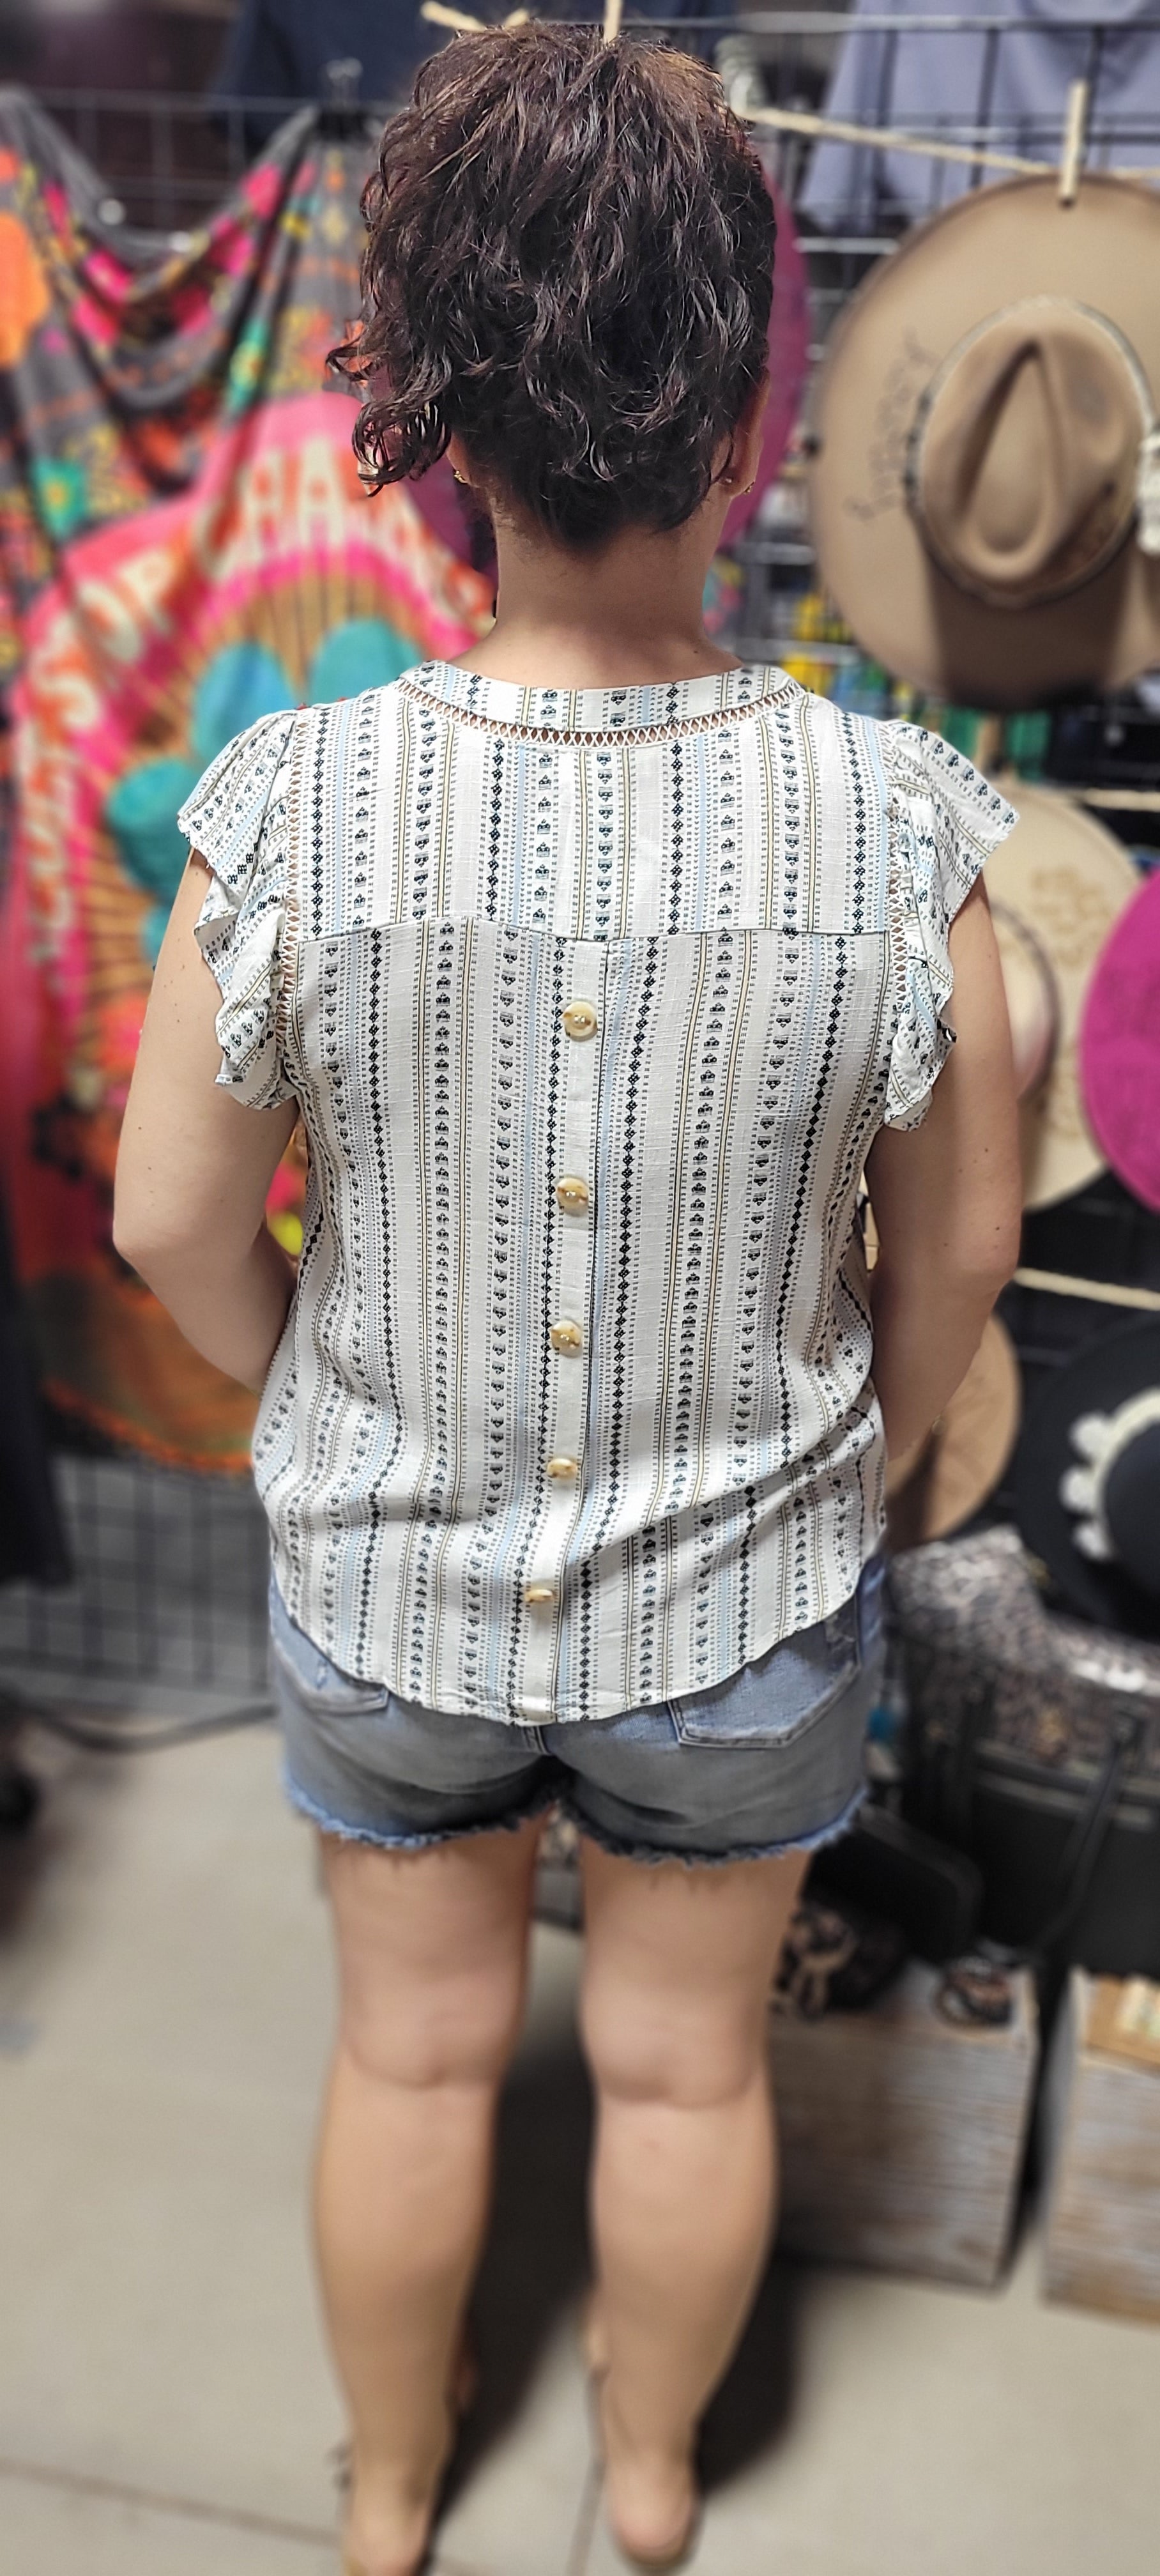 Be cool and breezy with this chambray-inspired Cindy Ivory &amp; Blue Patterned Top! Its v-neckline and short ruffle sleeves with lace trim give it a sweet and sassy look. The back yoke and non-functional buttons round out the look, with a subtle hint of western-style flair. Yee-haw!! Sizes small through large.